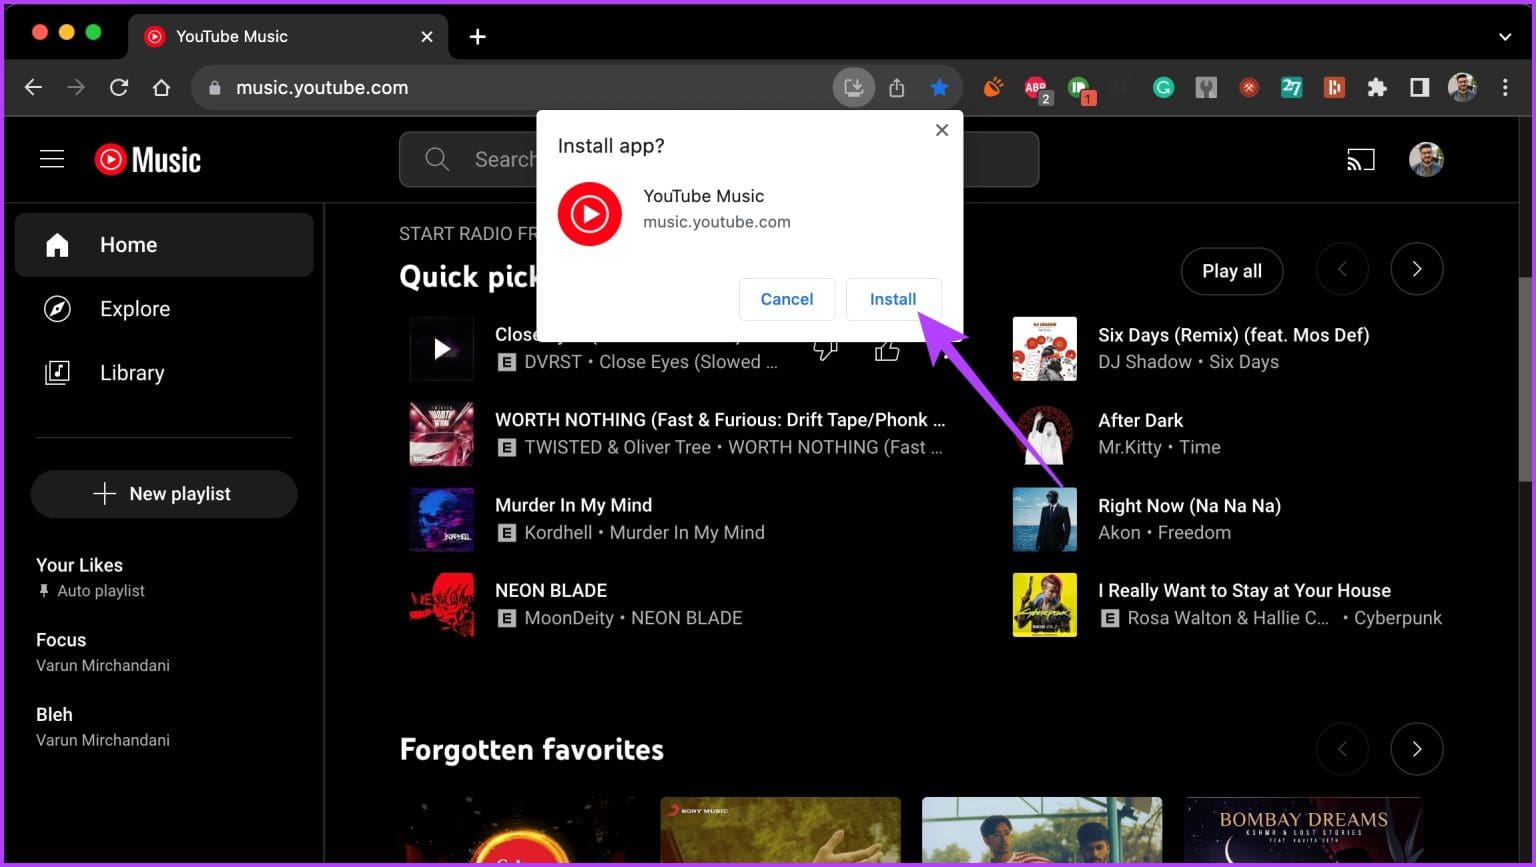 How to Install YouTube Music App on Desktop (Windows and Mac) - Guiding ...